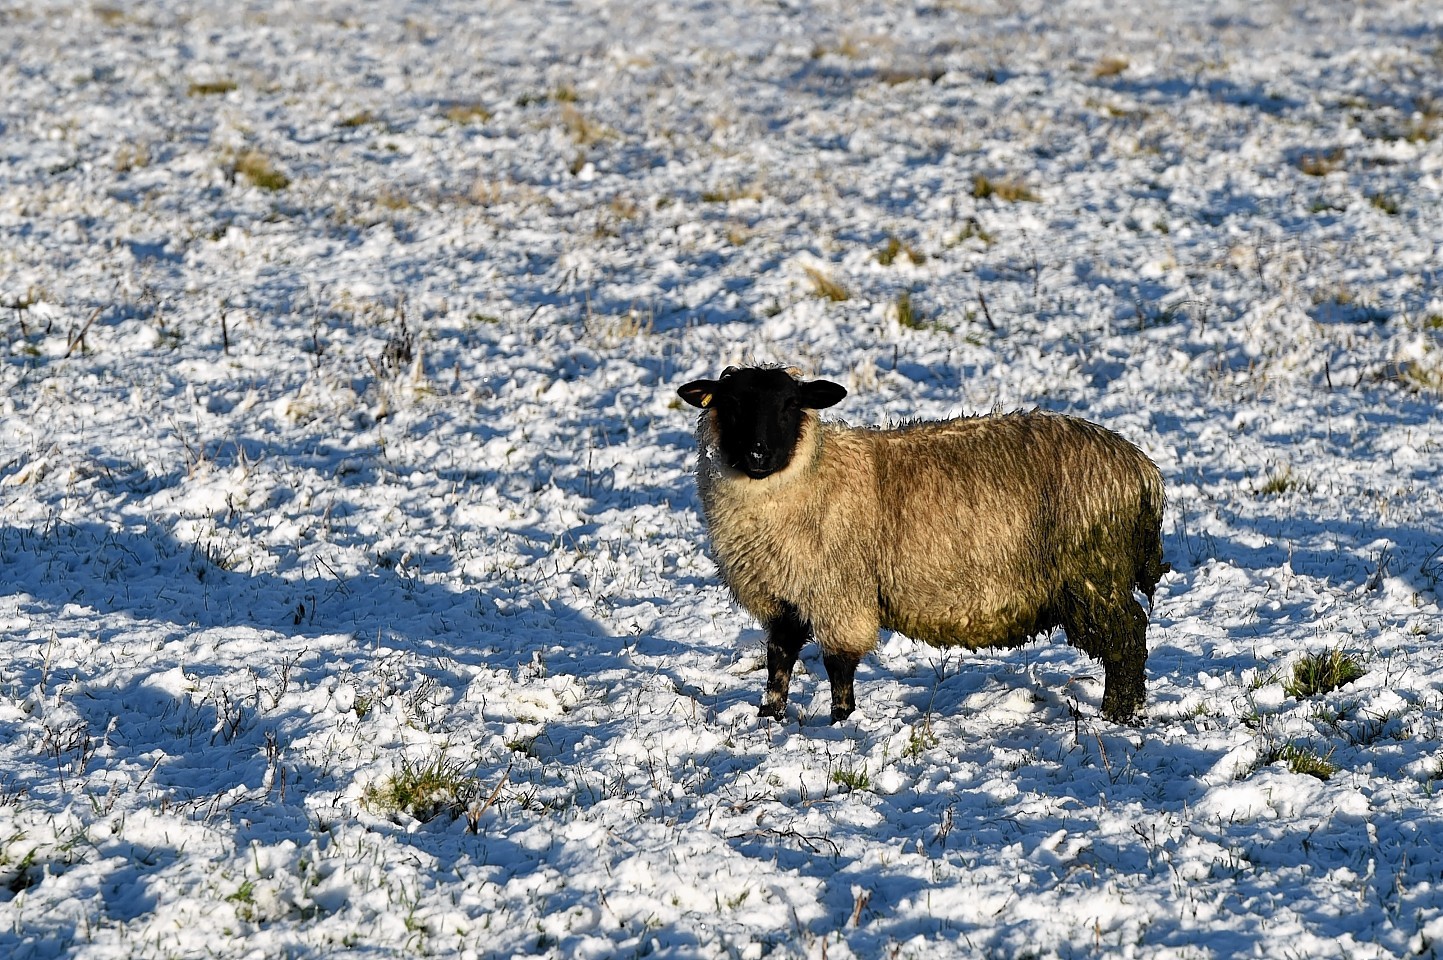 The sheep in the north-east seemed to enjoy the snow yesterday